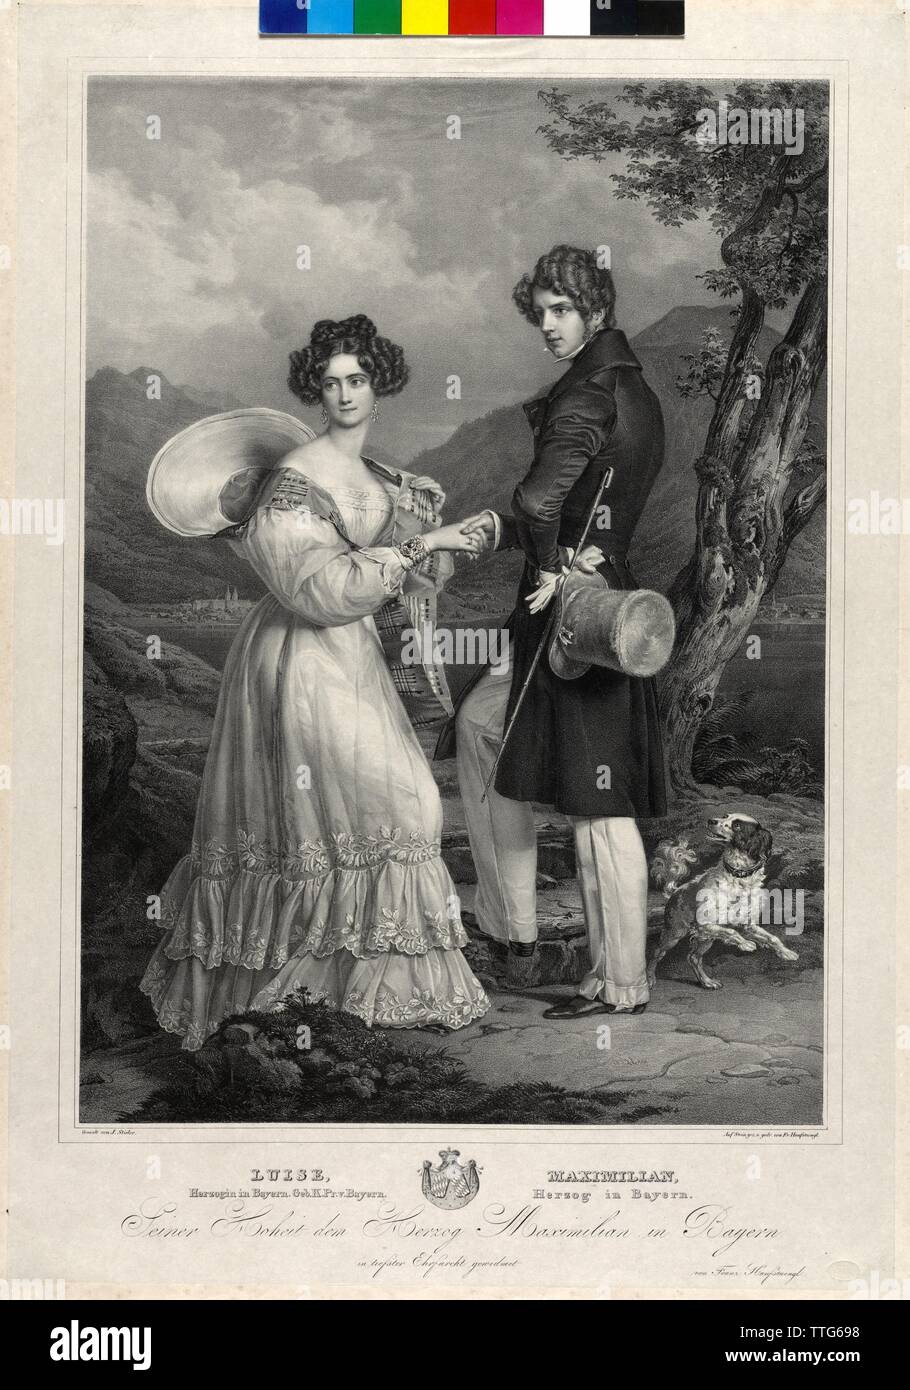 Maximilian, duke in Bavaria and his wife Louisa, The couple in the outside, together with a dog, The Tegernsee with the eponymous village, lithograph by Franz Seraph Hanfstaengl based on a painting by Joseph Charles Stieler. coat of arms. China, Additional-Rights-Clearance-Info-Not-Available Stock Photo